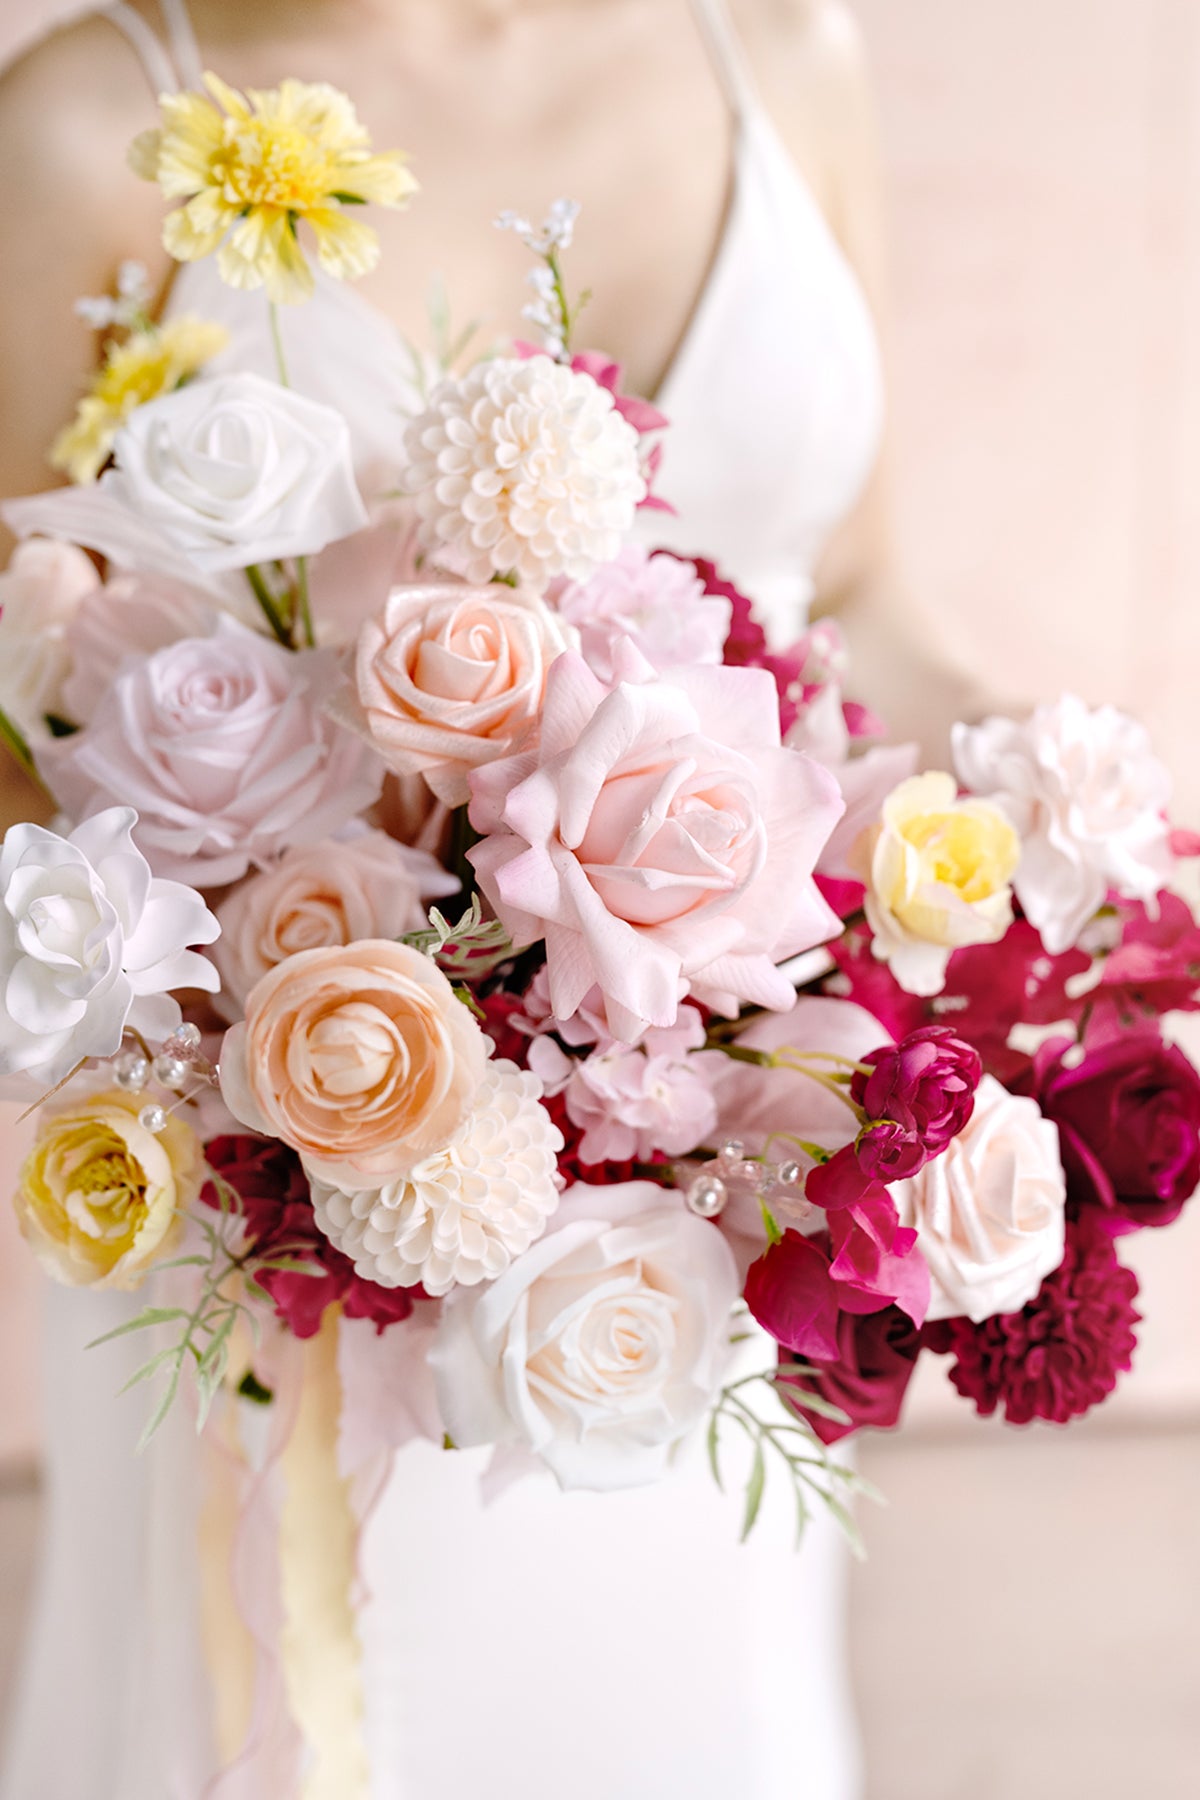 Medium Free-Form Bridal Bouquet in Passionate Pink & Blush